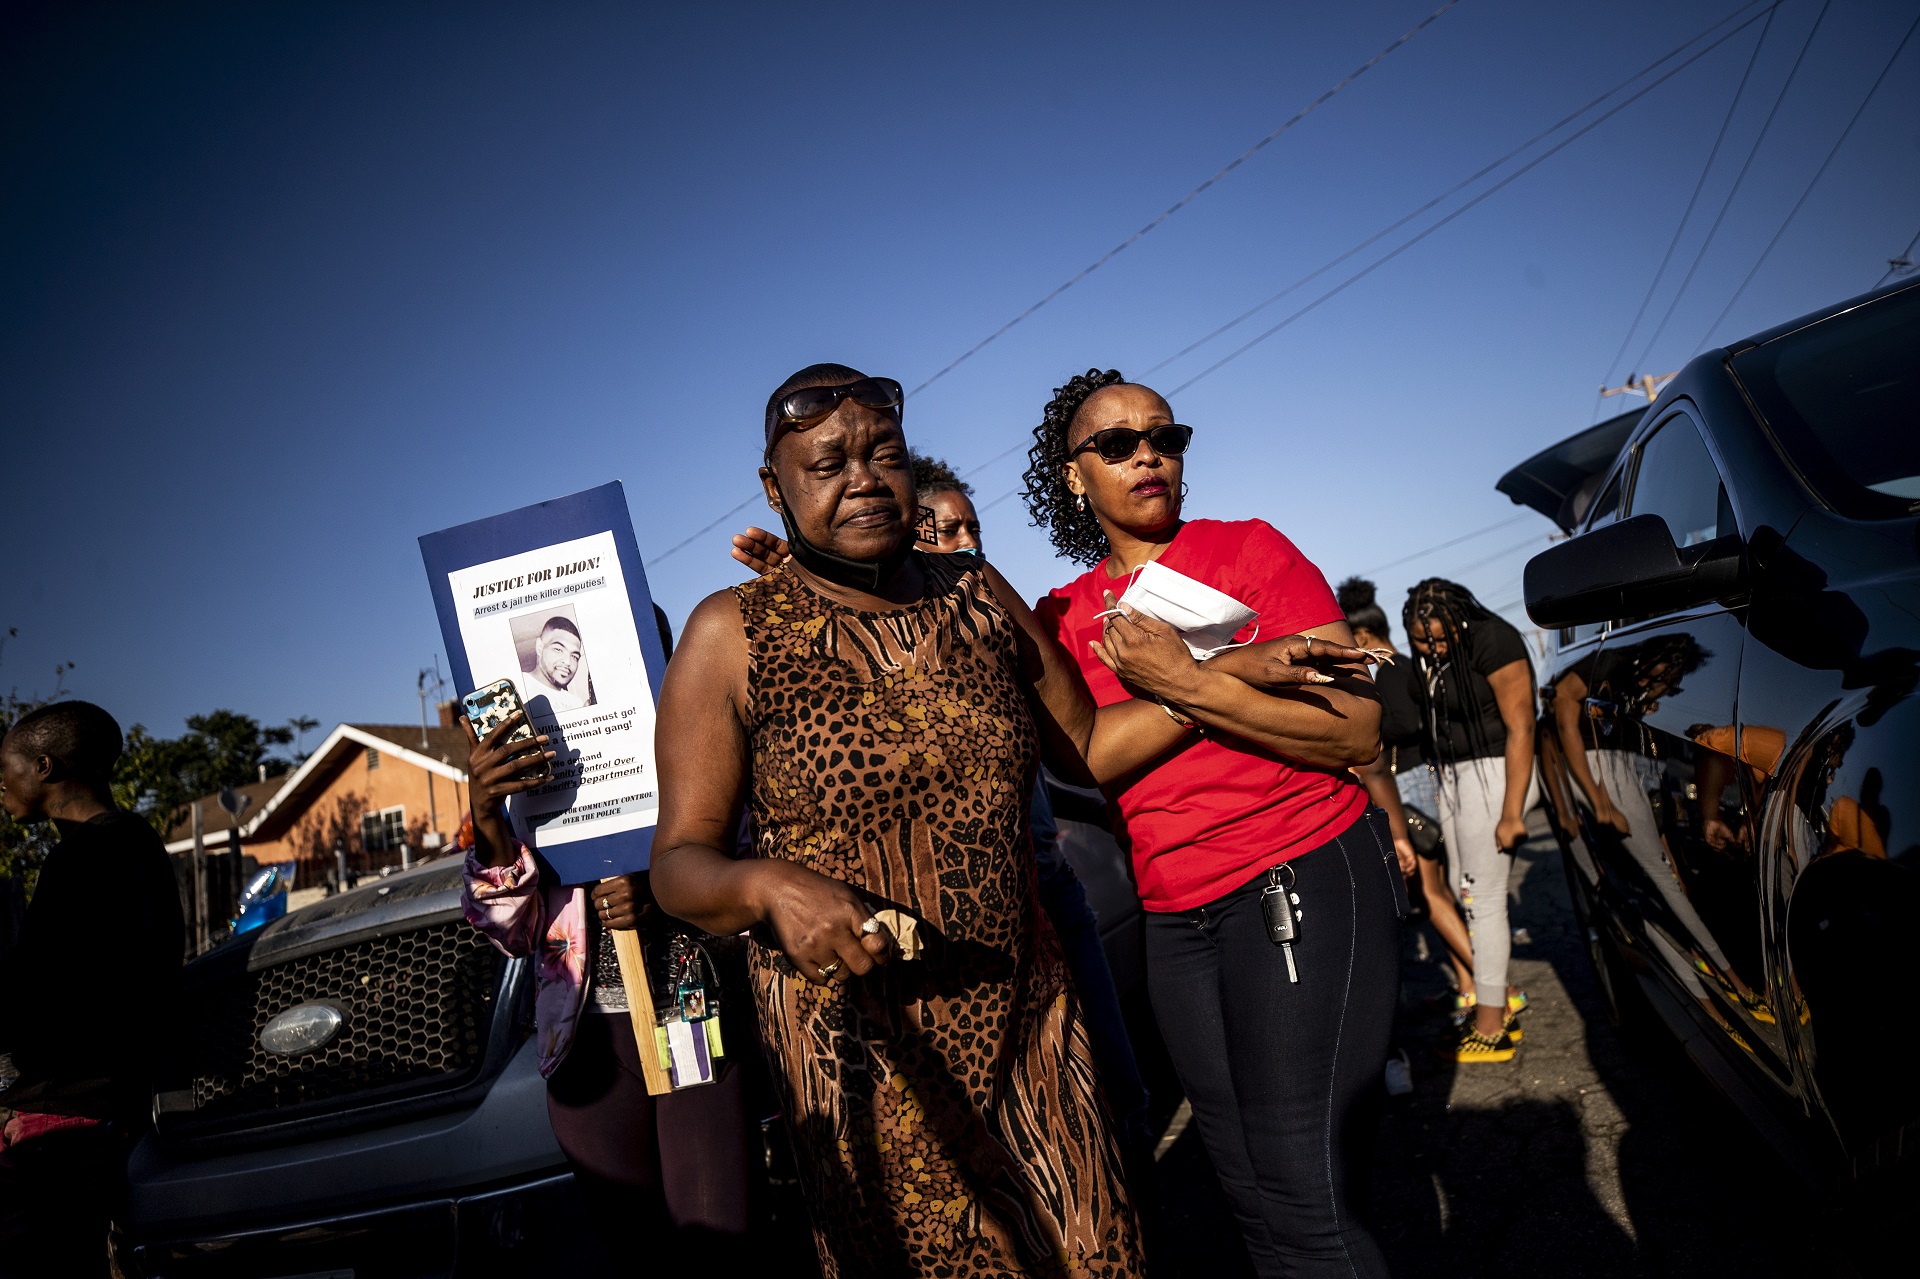 epa08640524 Dijon Kizzee's aunt Debra Ray (L) cries where Dijon Kizzee was shot by two sheriff deputies in Westmont, Los Angeles, California, USA, 01 September 2020. Dijon Kizzee, a 29-year-old Black man, was shot 20 times in the back by Los Angeles police officers after being stopped for a bicycle violation on 31 August 2020.  EPA/ETIENNE LAURENT